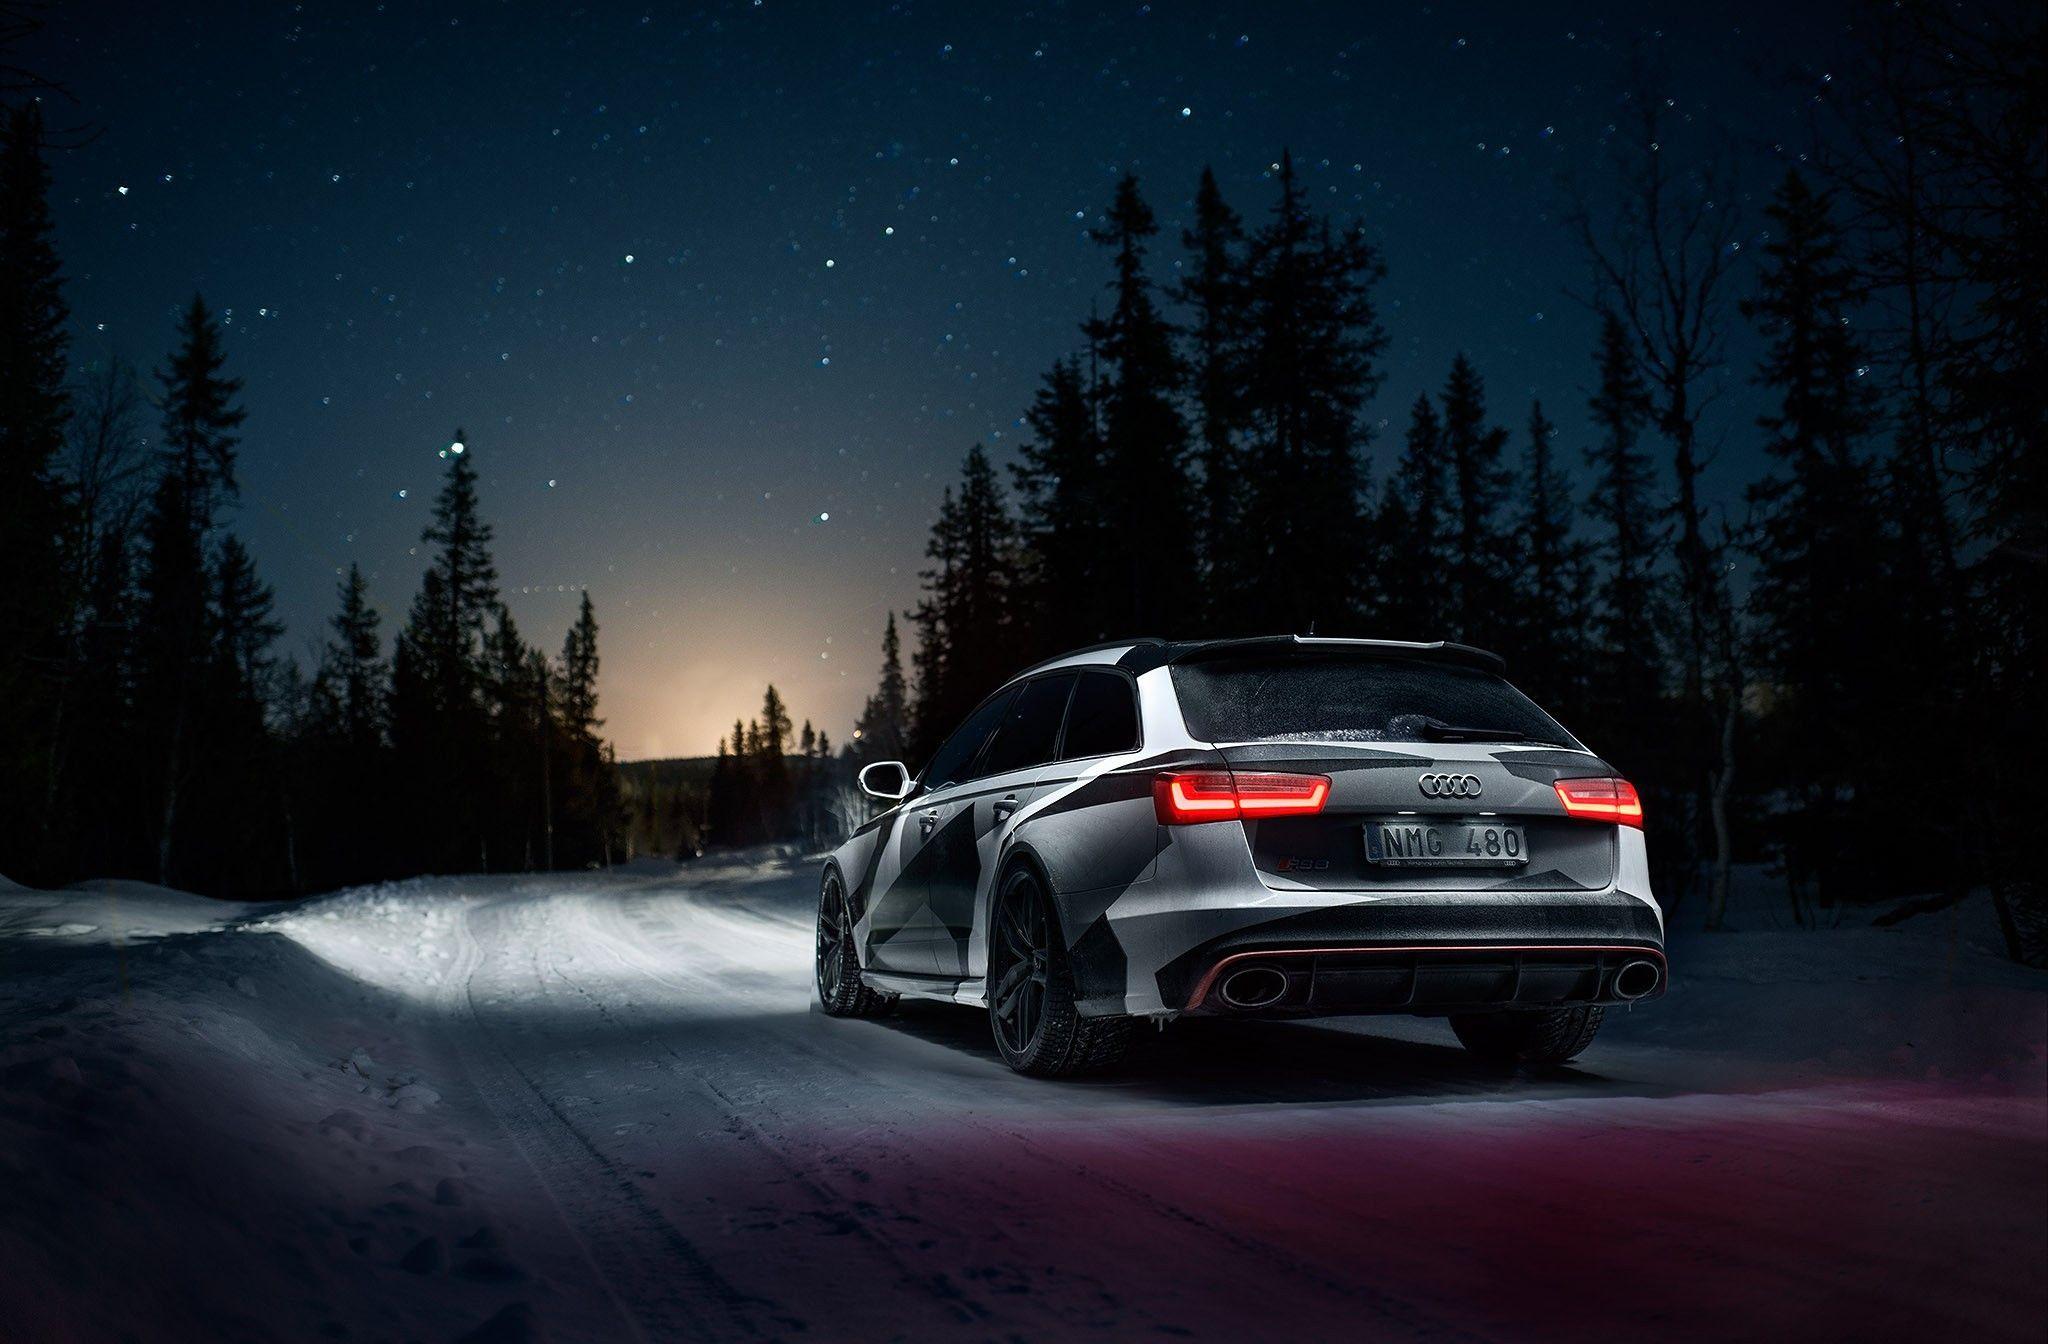 Audi RS6 Avant on night road wallpaper and image